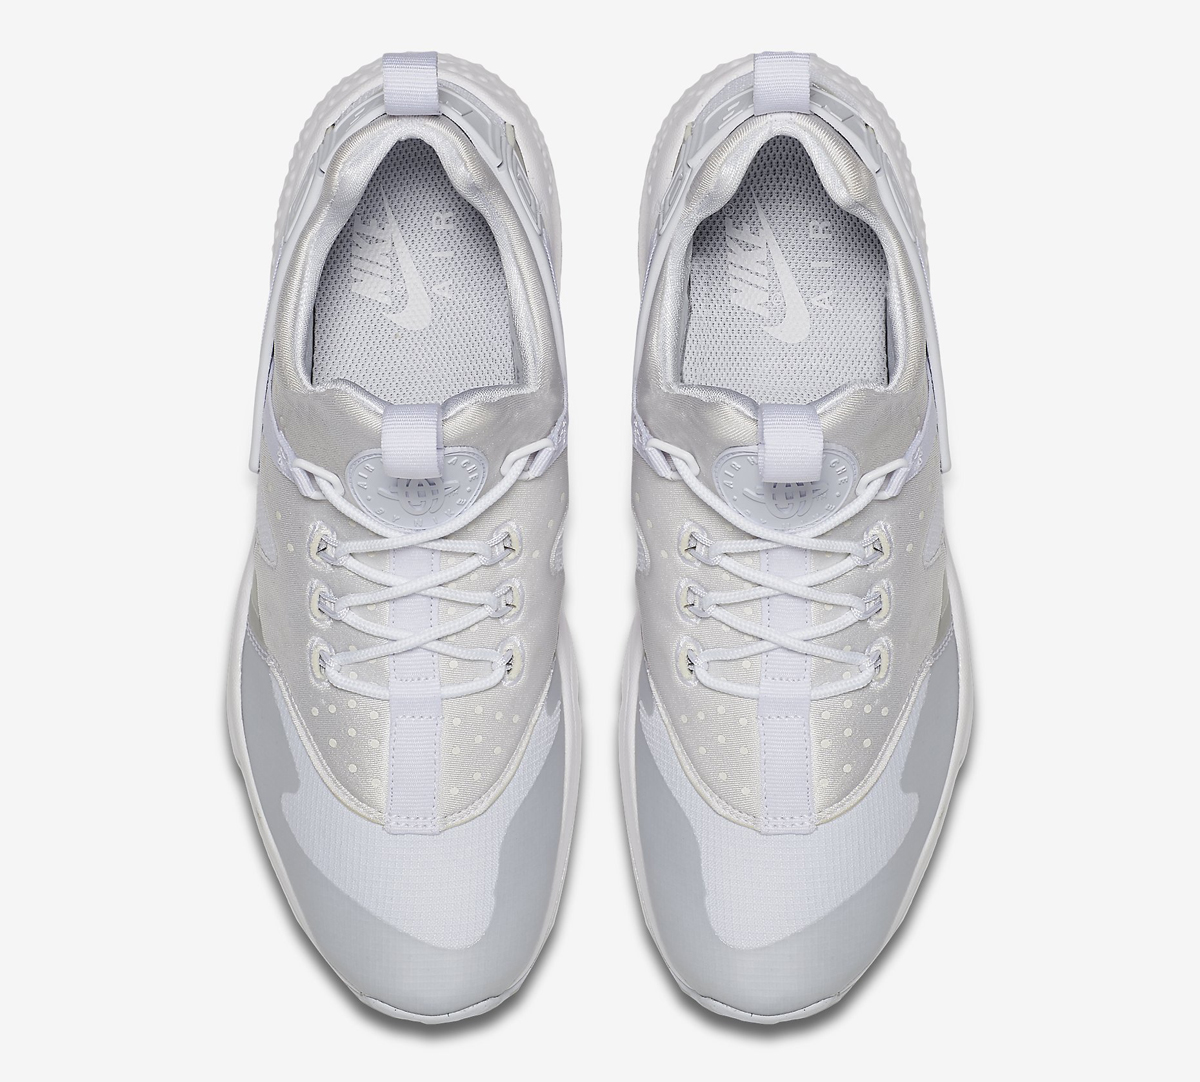 Nike Has Another All-White Huarache | Sole Collector